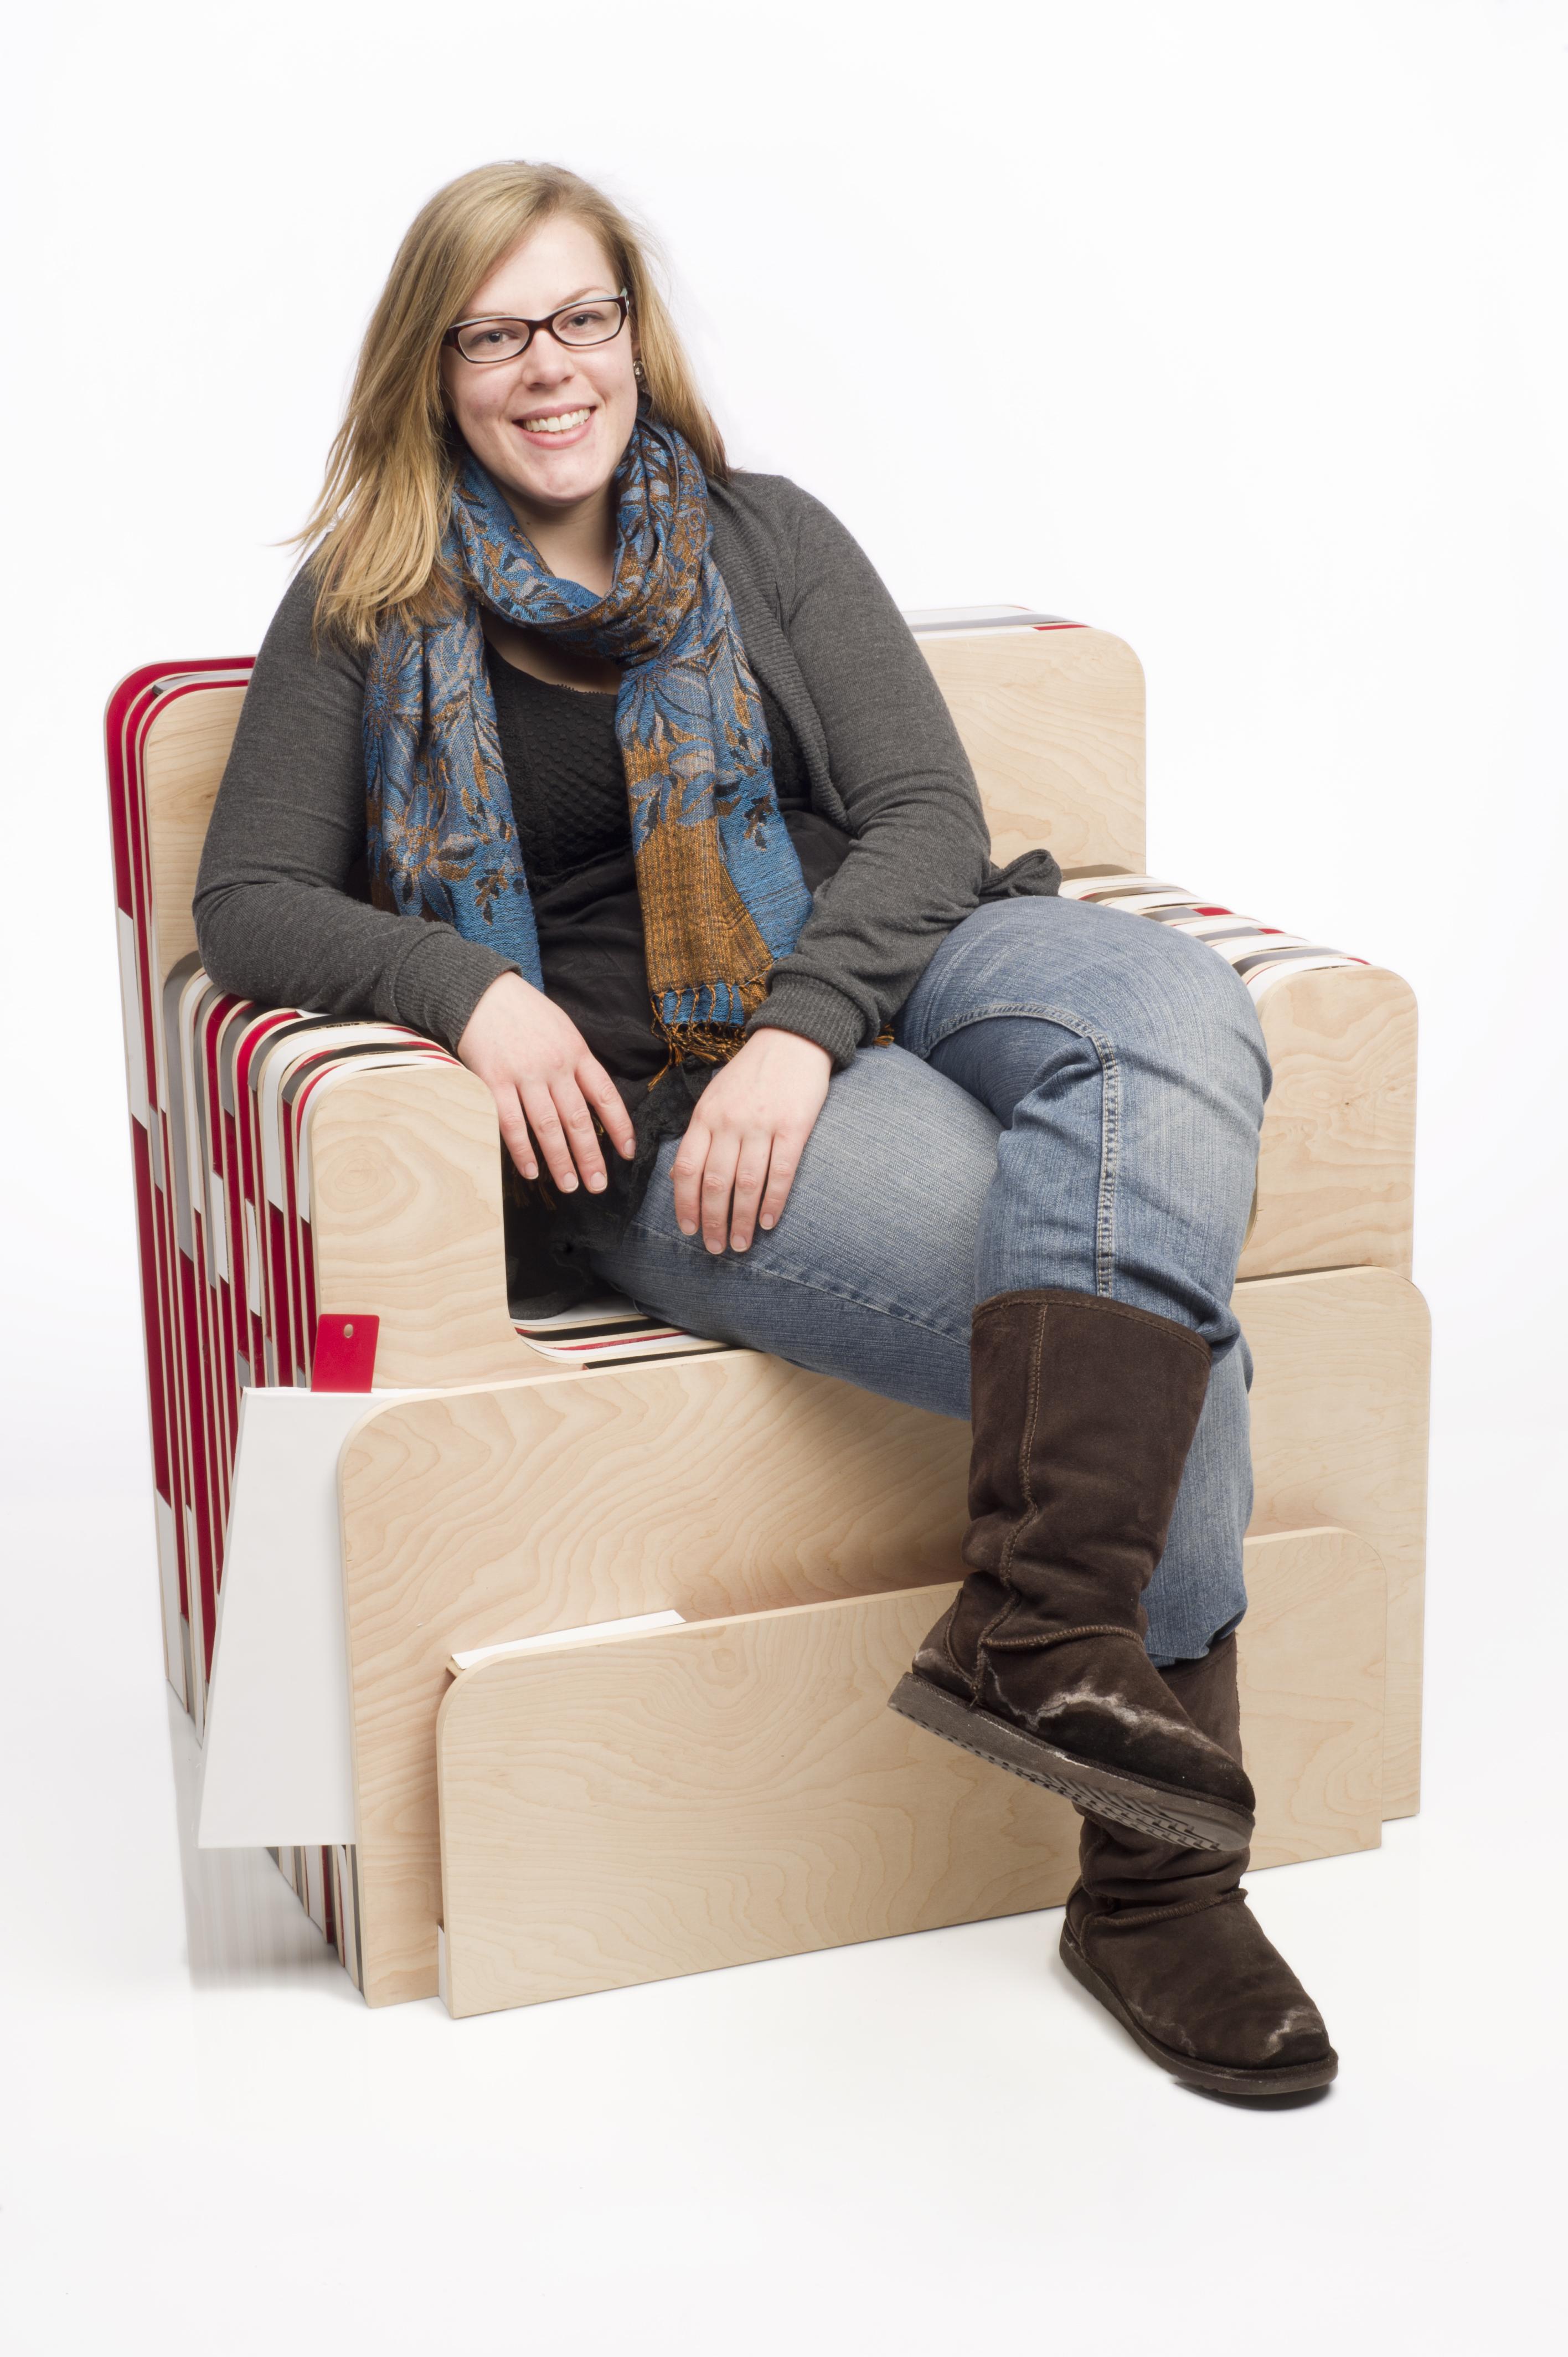 A person uses a wooden chair design mixed with different fabrics.